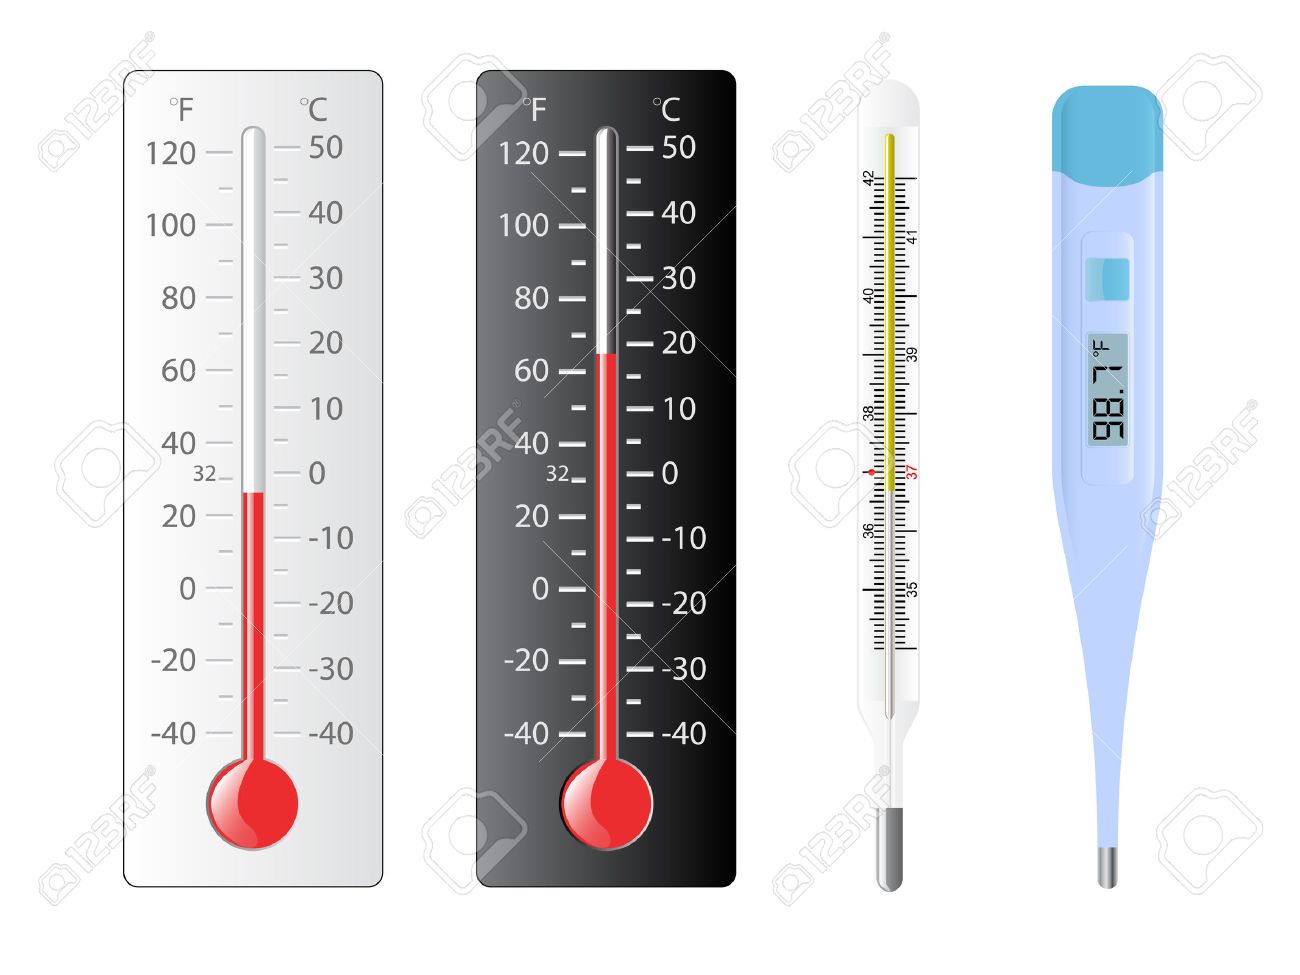 6696456-four-different-types-of-thermometers-with-several-temperatures.jpg